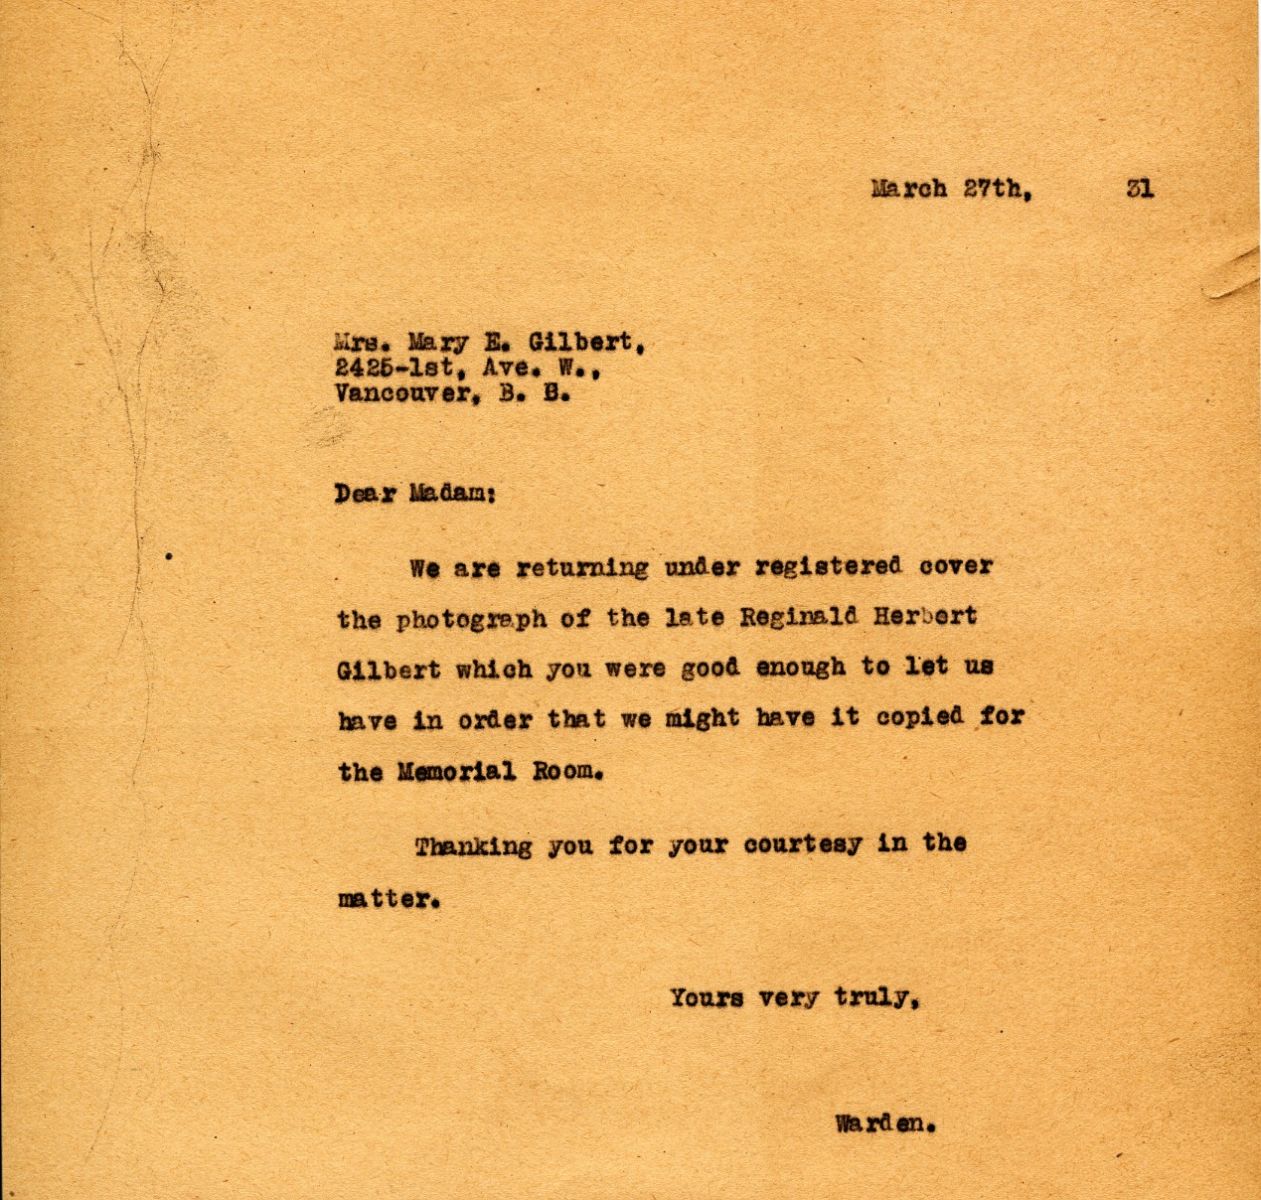 Letter from the Warden to Mrs. Mary E. Gilbert, 27th March 1931